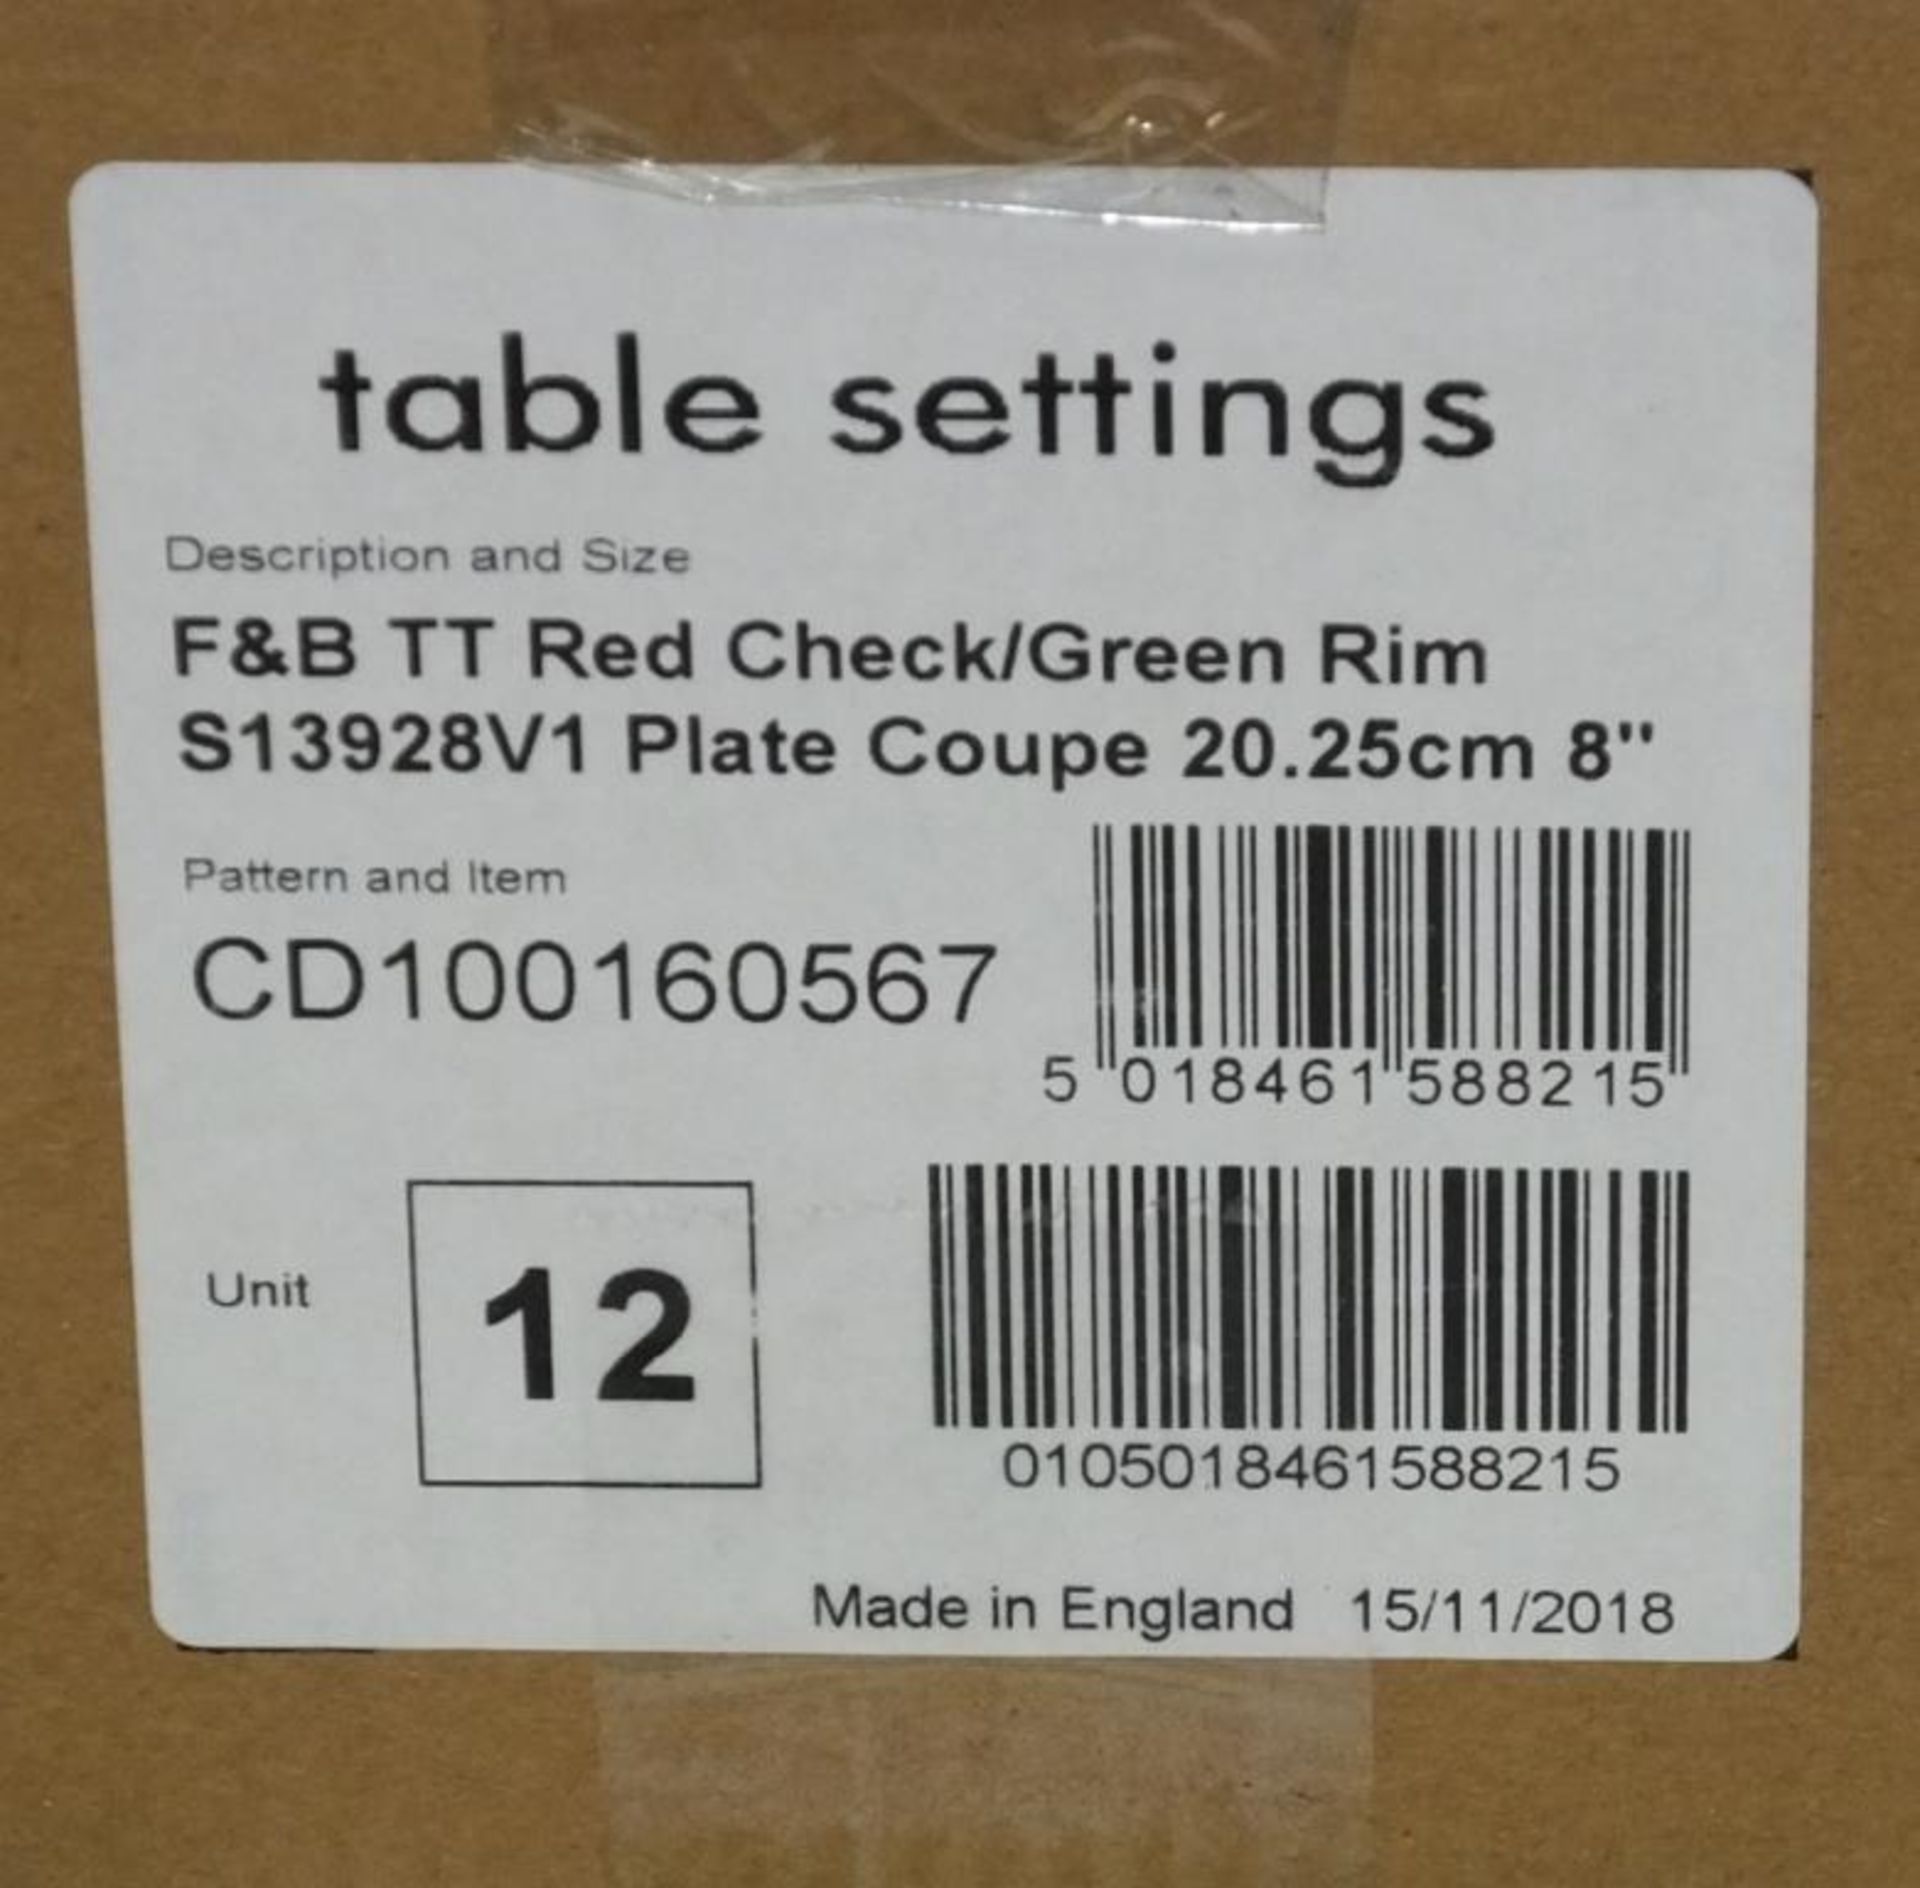 Steelite table setting plates - Red Check/Green Rim Plate Coupe 20.25cm / 8 in - 12 per box 5 boxes - Image 4 of 5